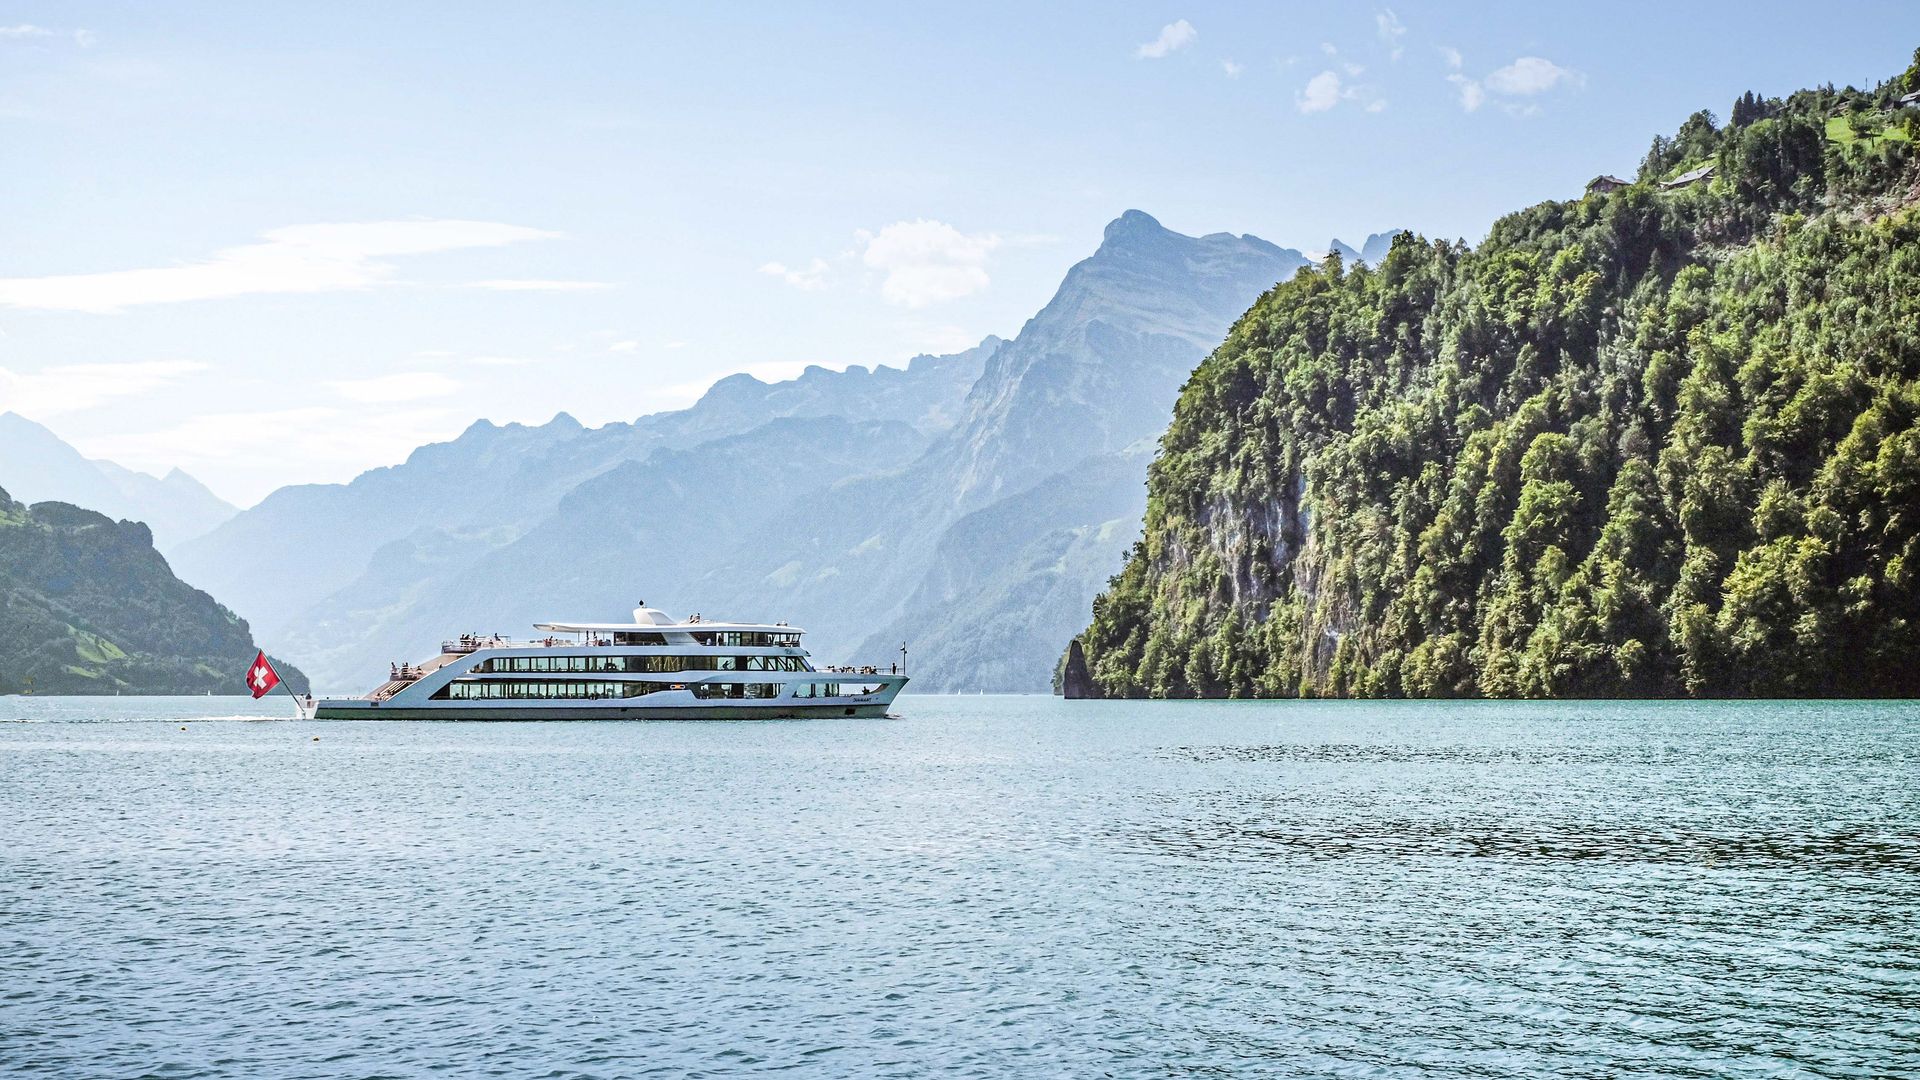 Scheduled boat trips on Lake Lucerne in the winter months